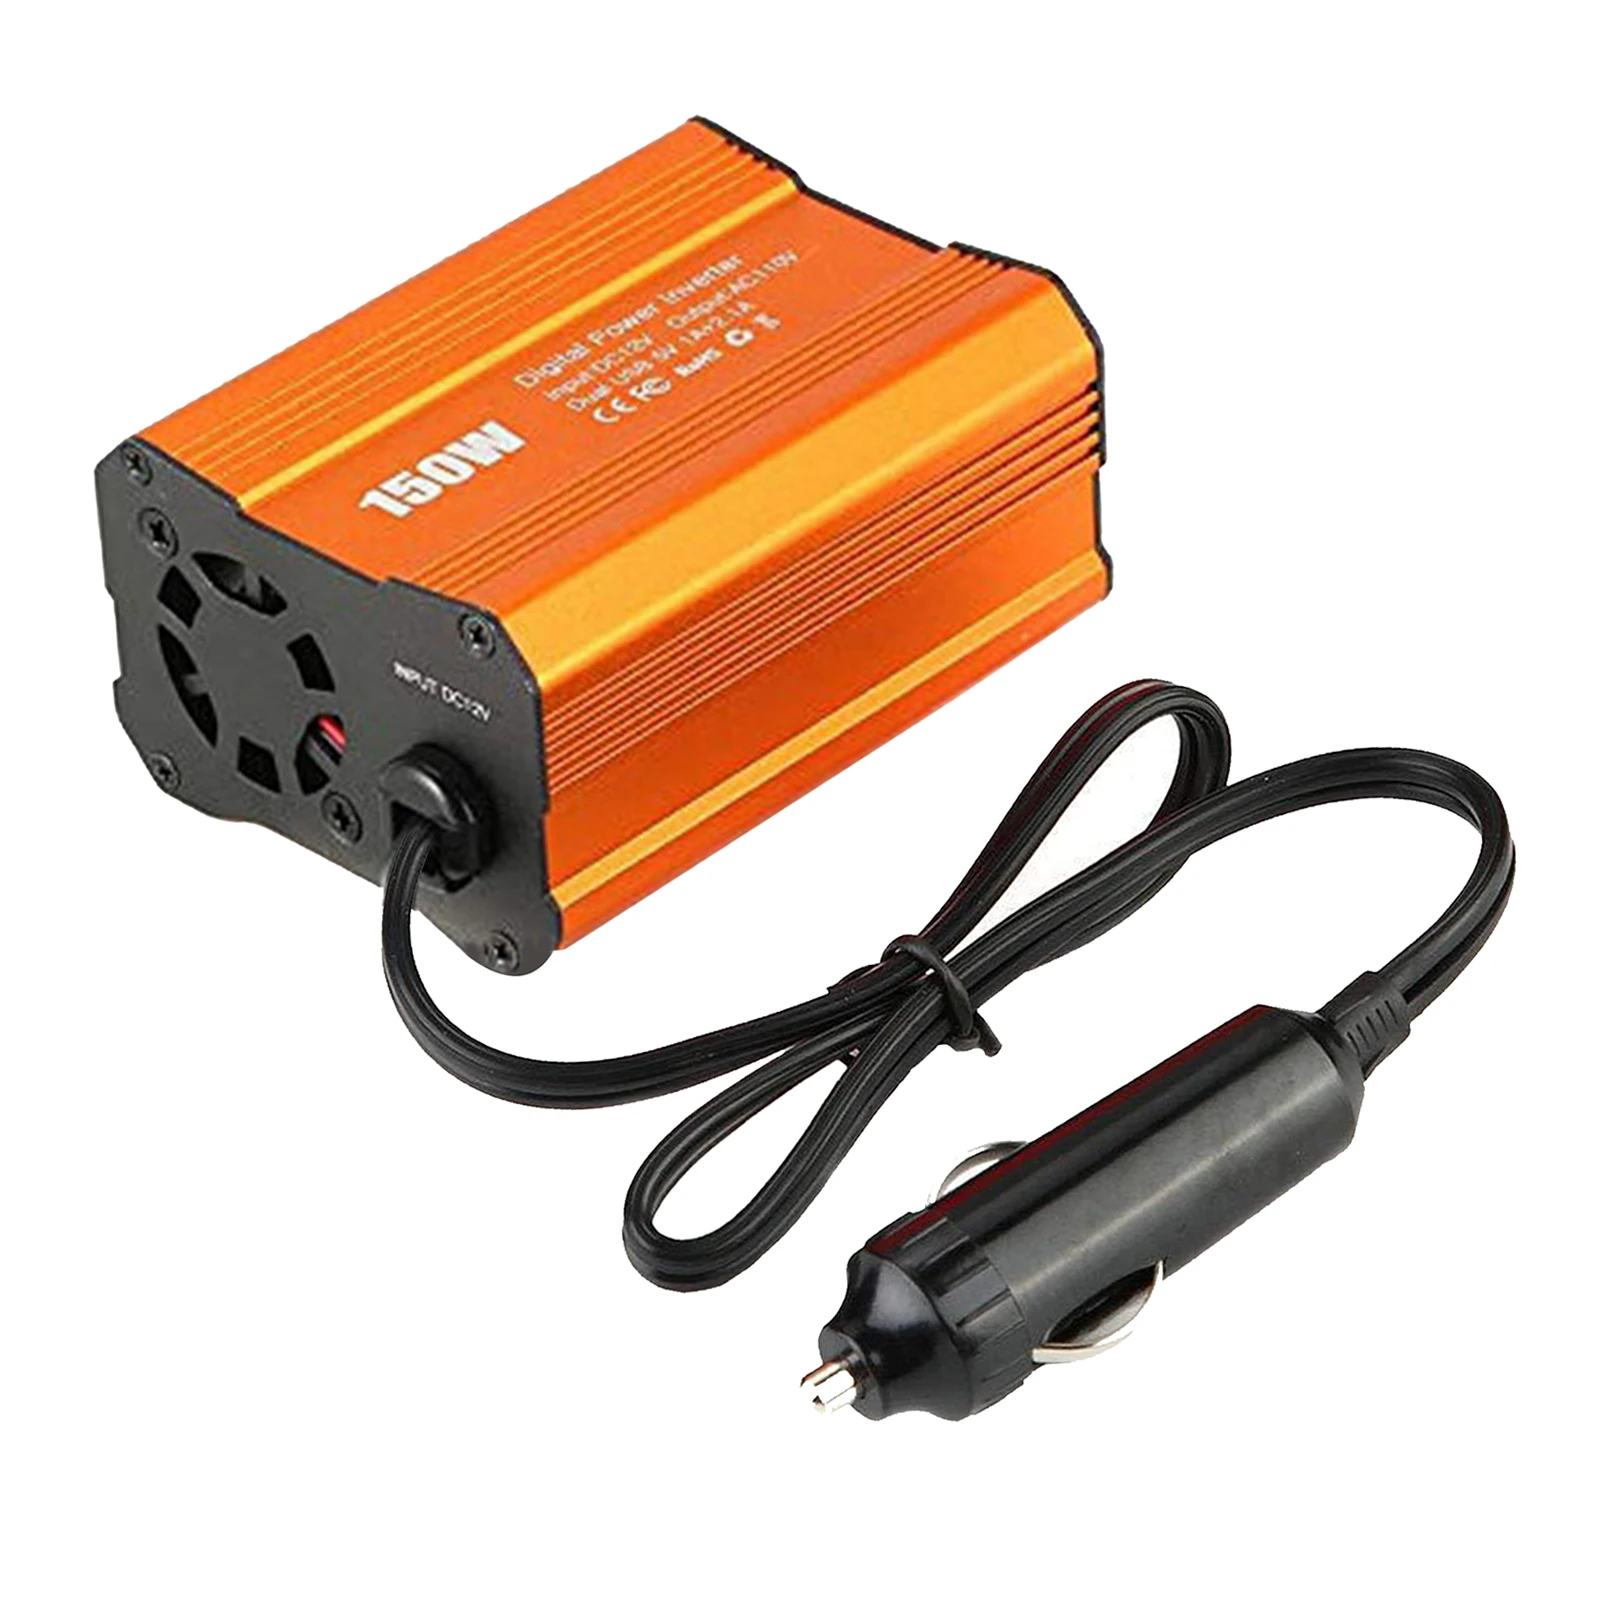 150W Car Power Inverter inversor DC 12V To AC 220V 2.1A Dual USB Ports Car Charger Adapter